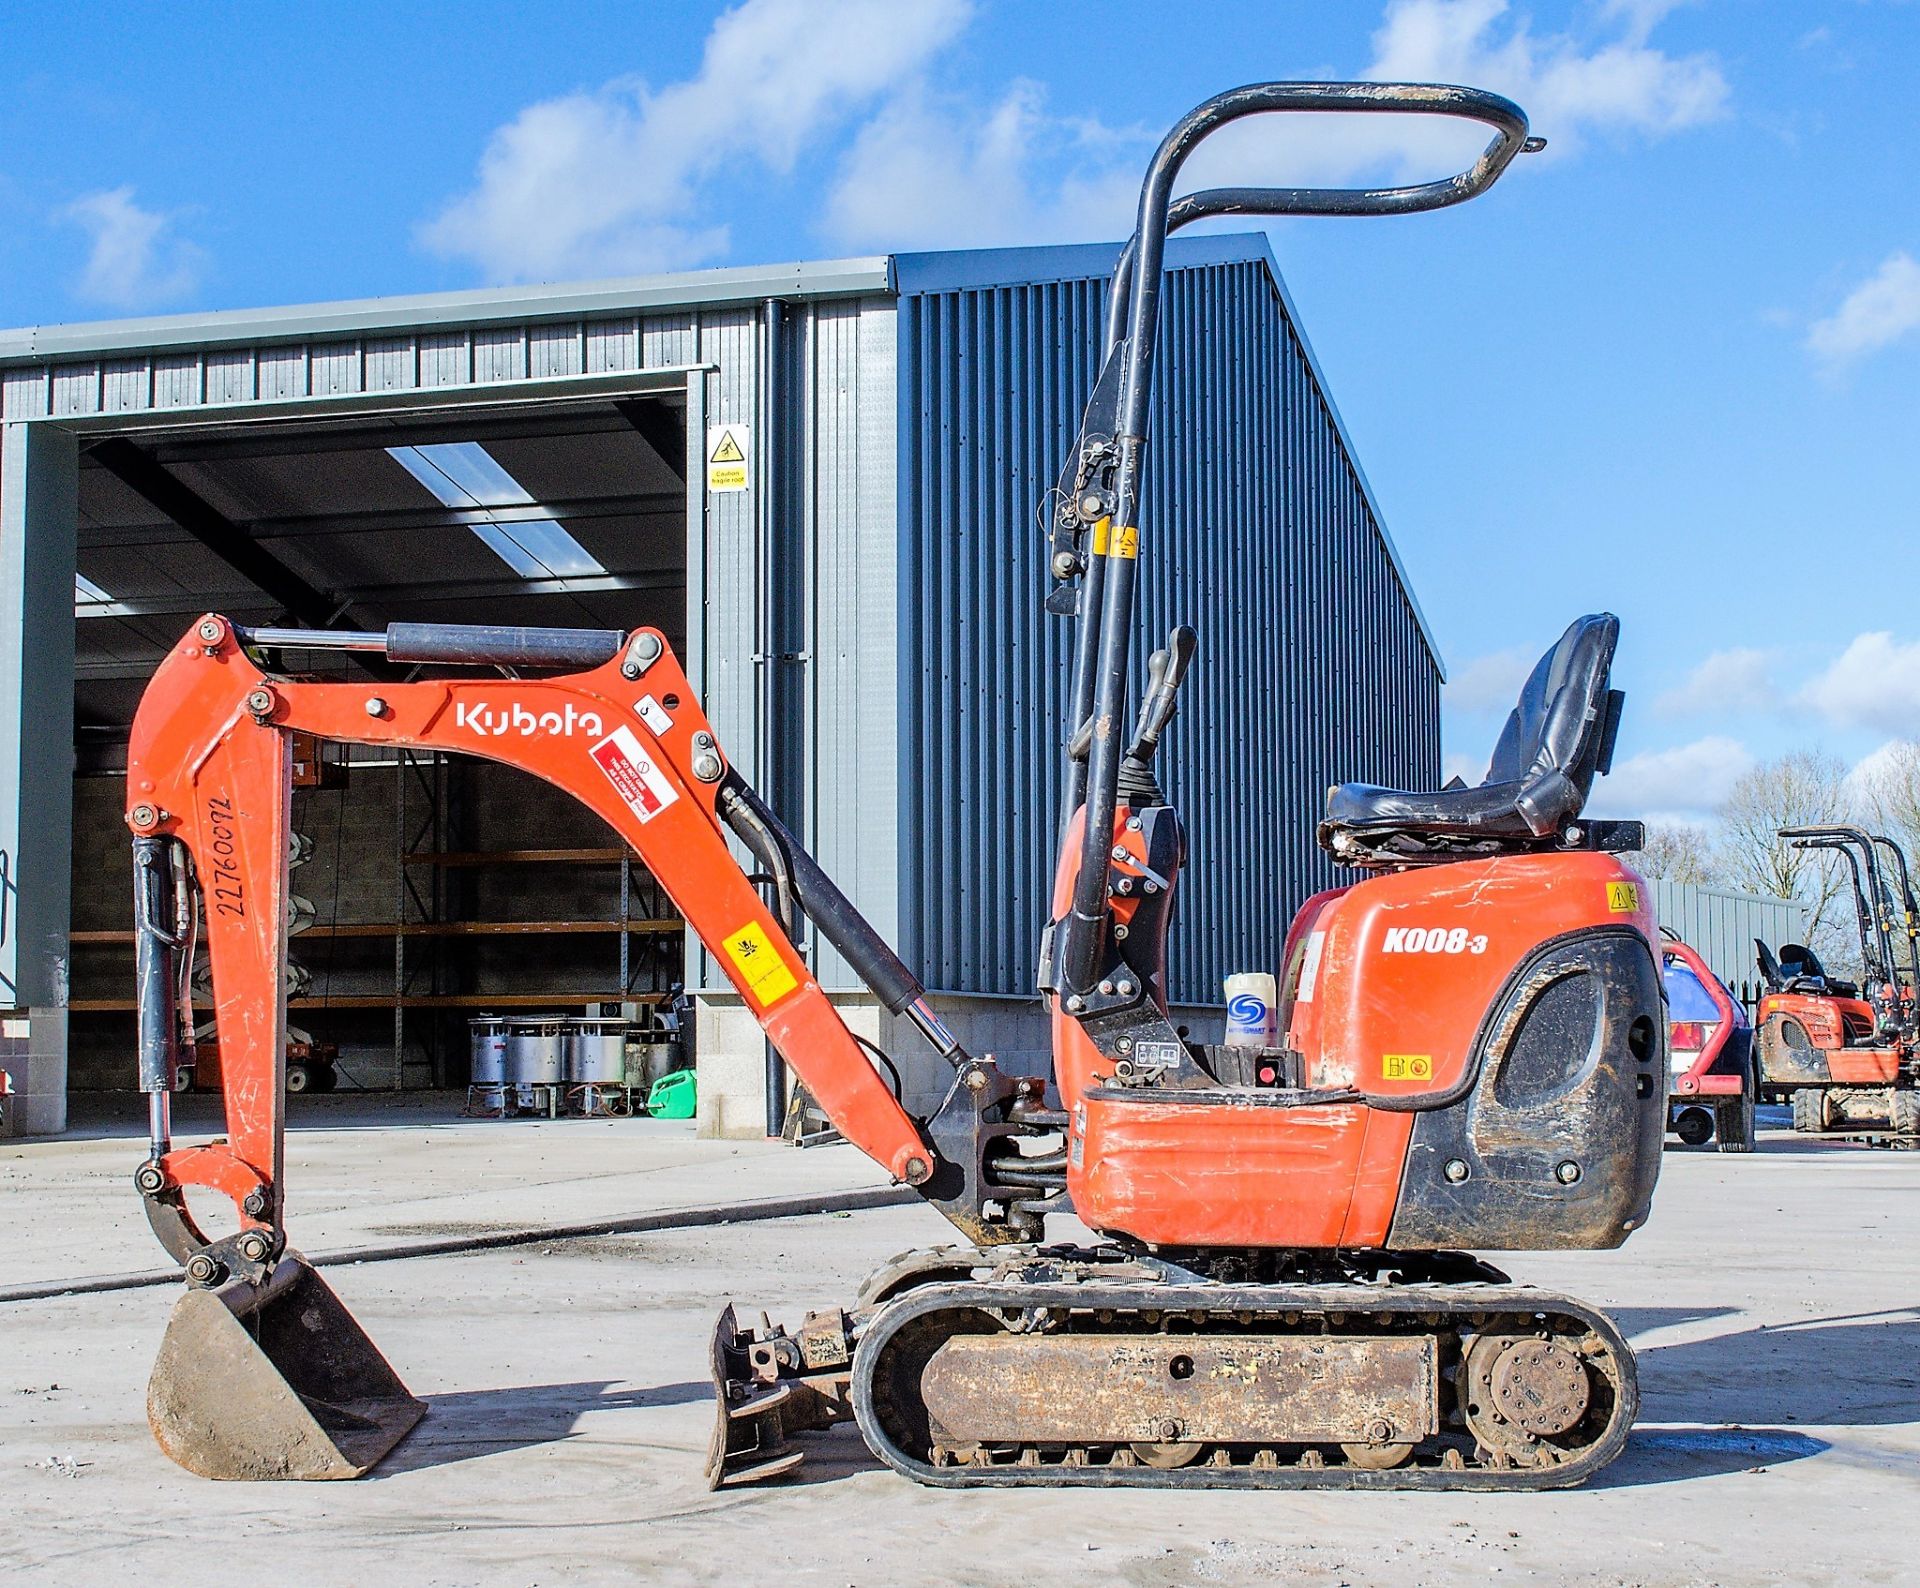 Kubota K008-3 0.8 tonne rubber tracked micro excavator Year: 2017 S/N: 29573 Recorded Hours: 1058 - Image 8 of 18